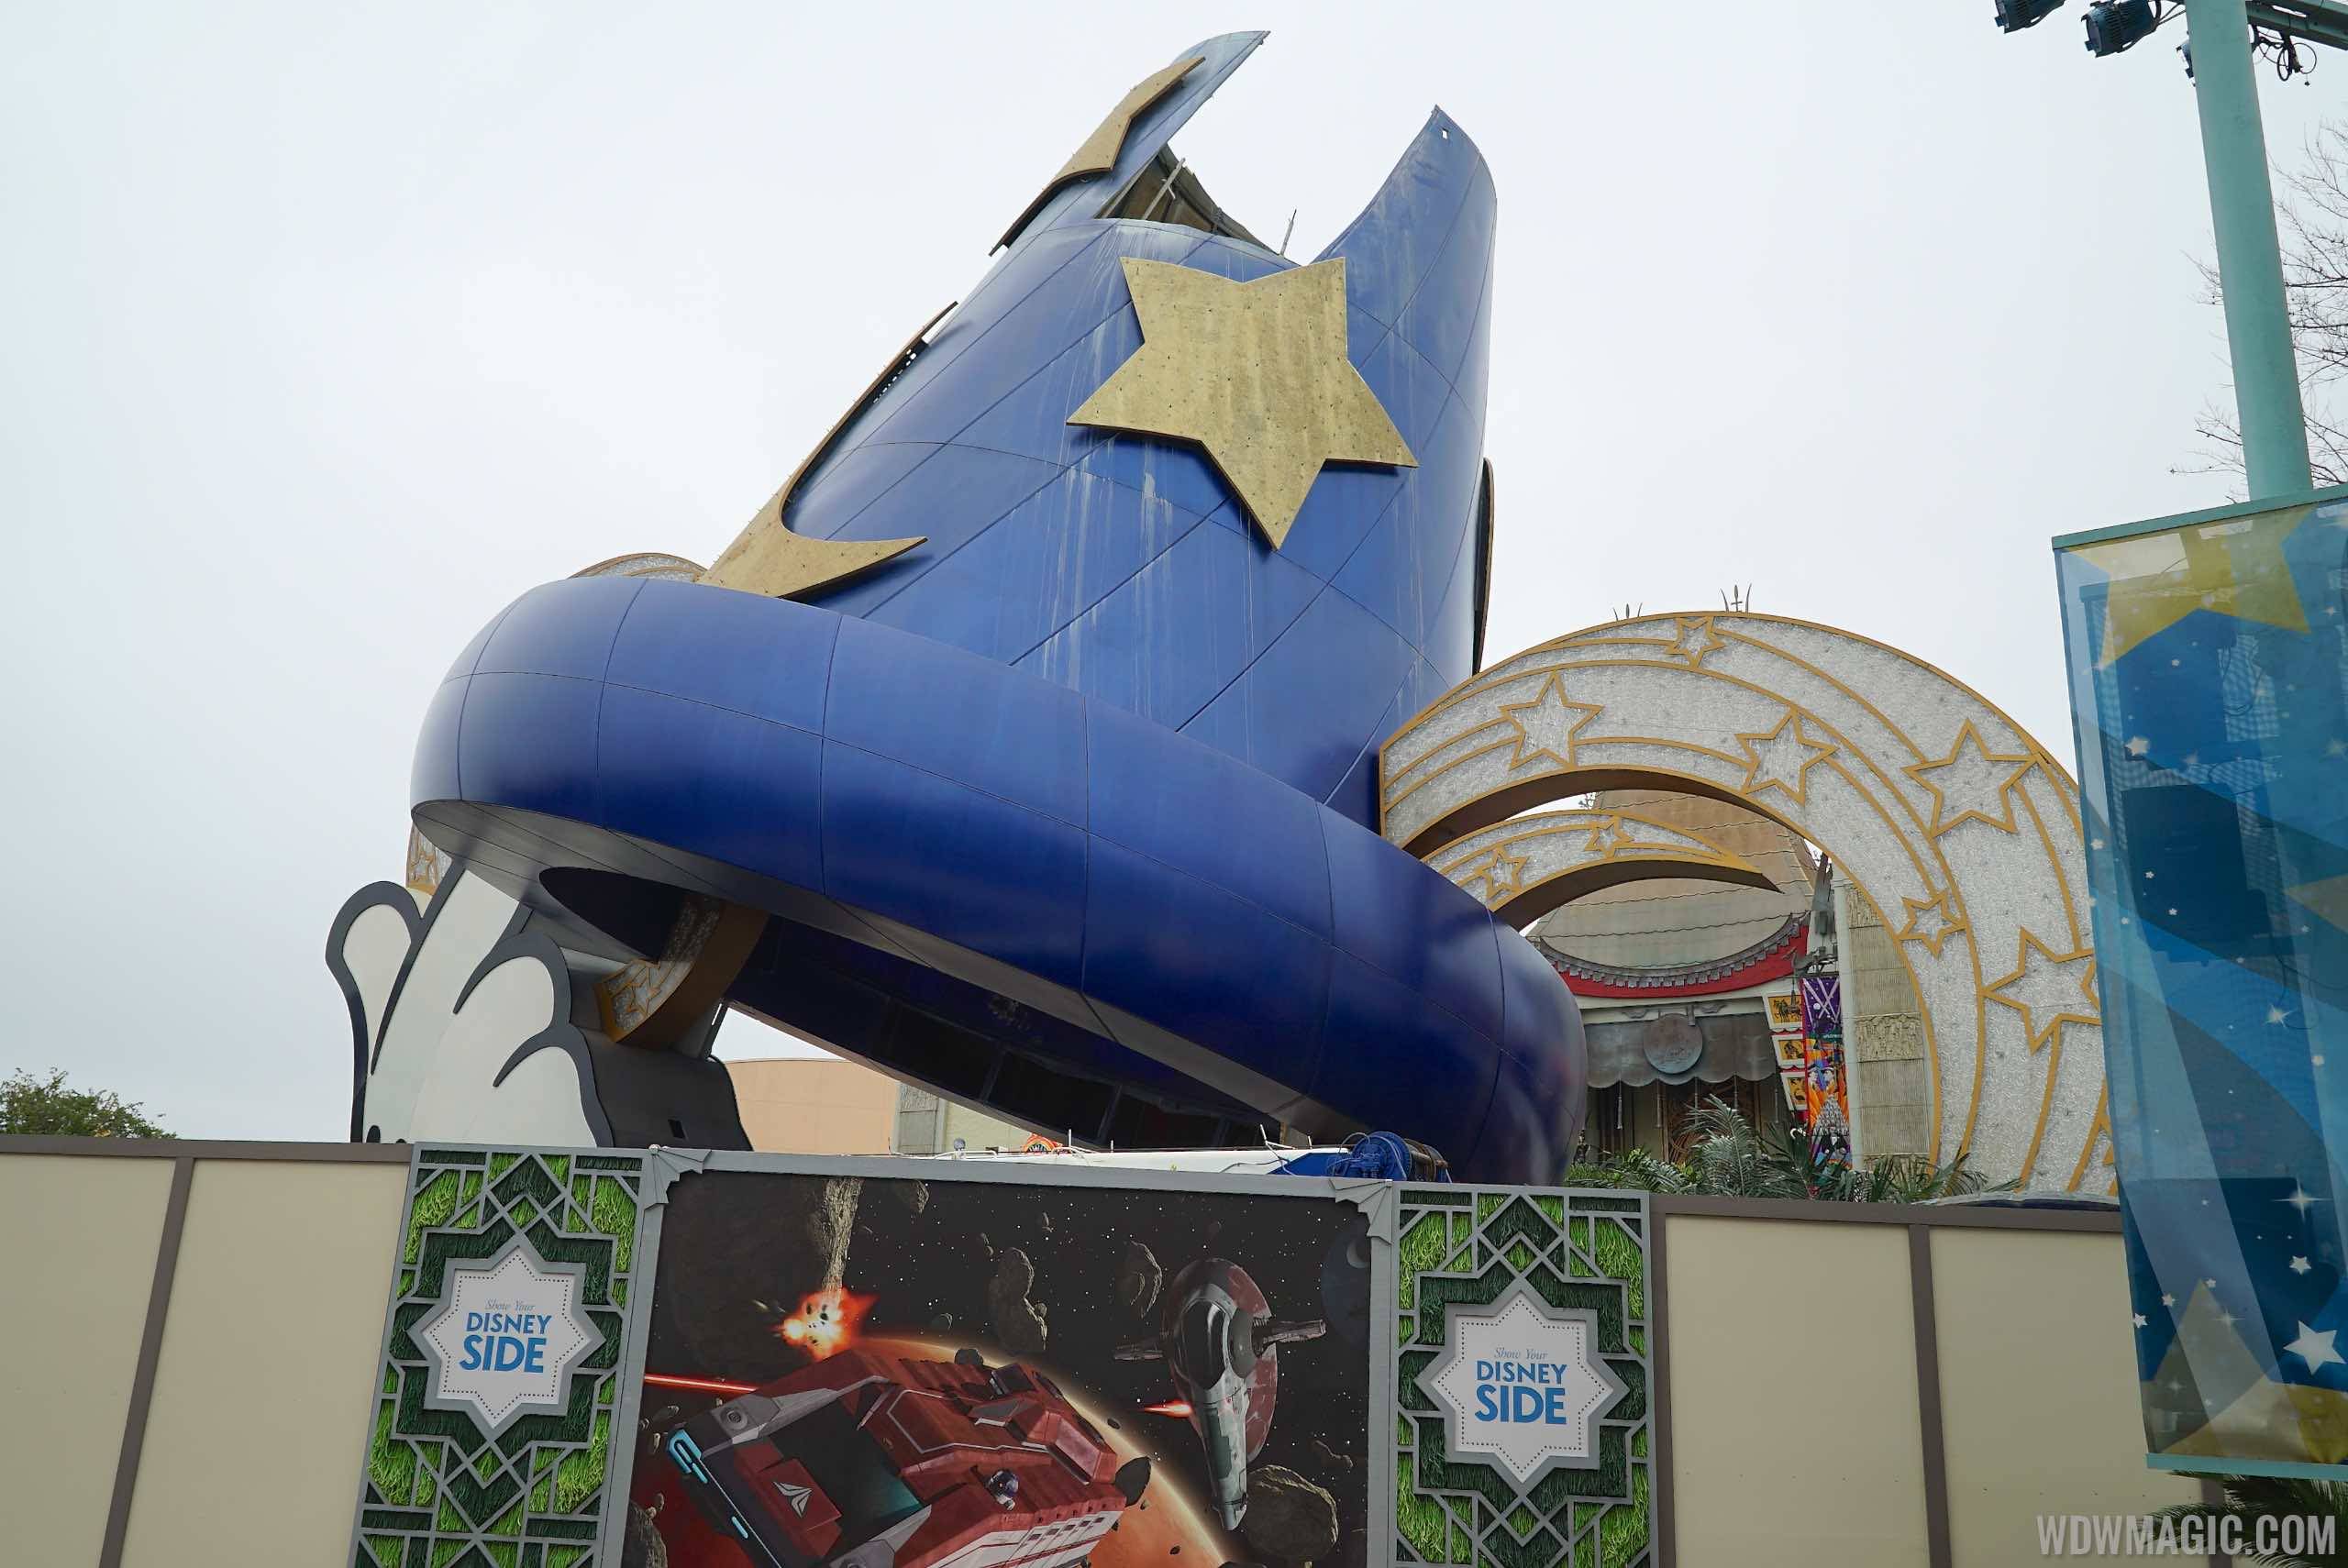 PHOTOS - Latest look at the Sorcerer Mickey Hat icon demolition at Disney's Hollywood Studios